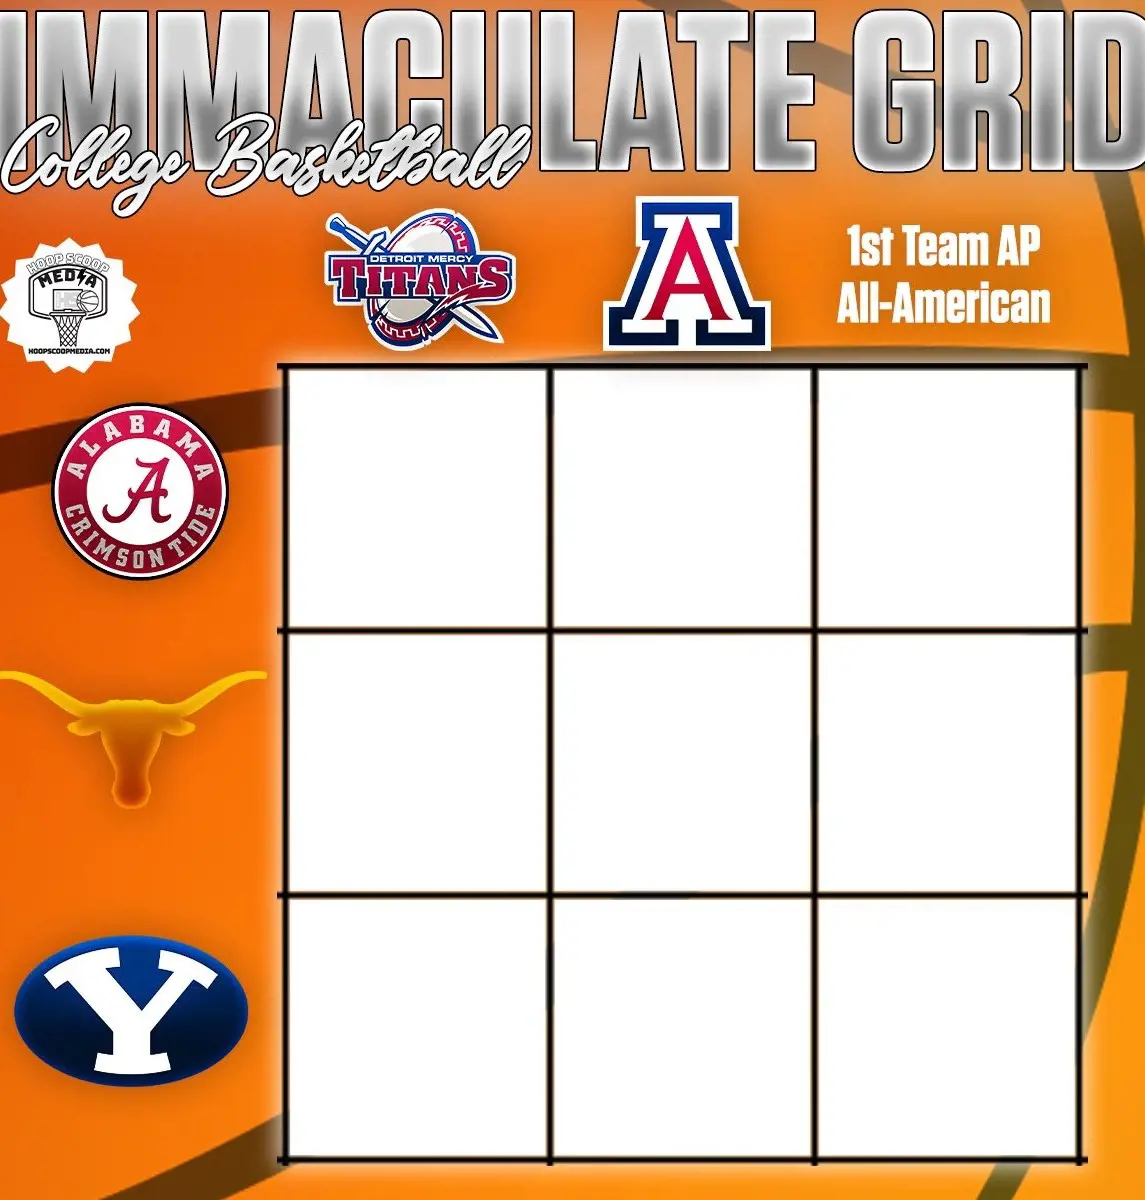 Trivia Game For Varsity Basketball With Teams and First Team AP All-American